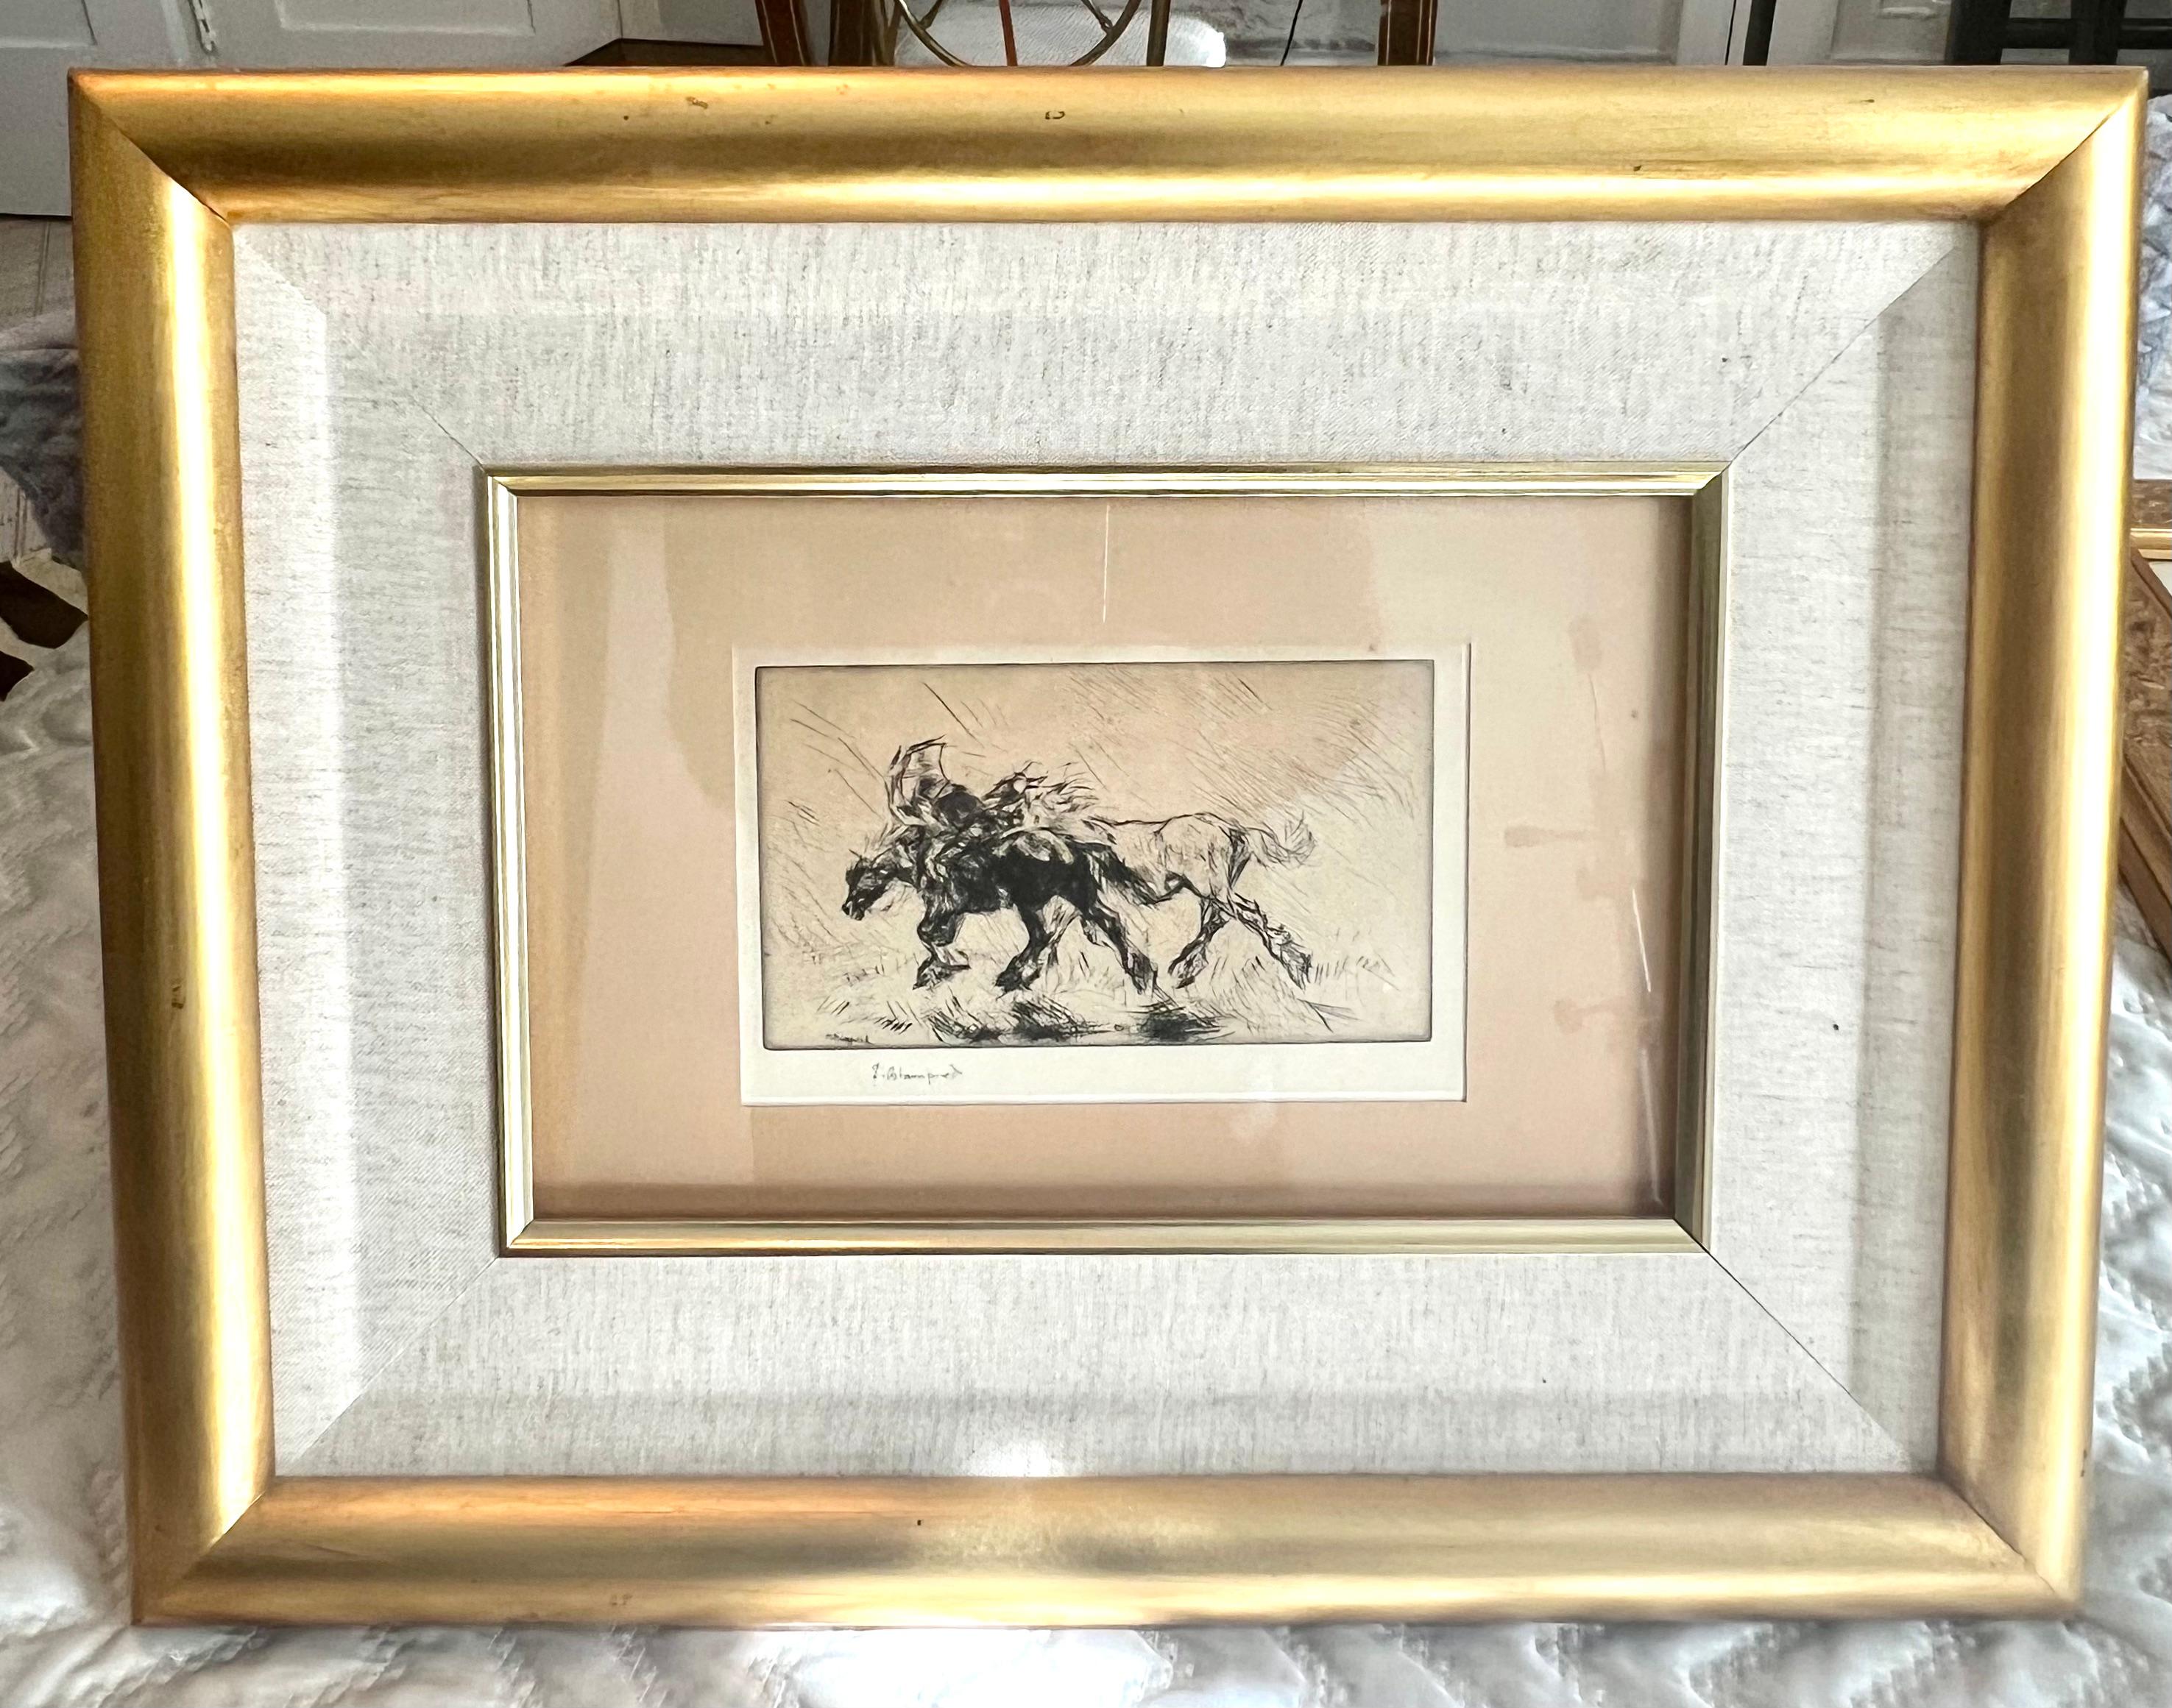  	Edmund Blampied Pen Drawing of a Horse Matted and Framed in Gilt Frame For Sale 1